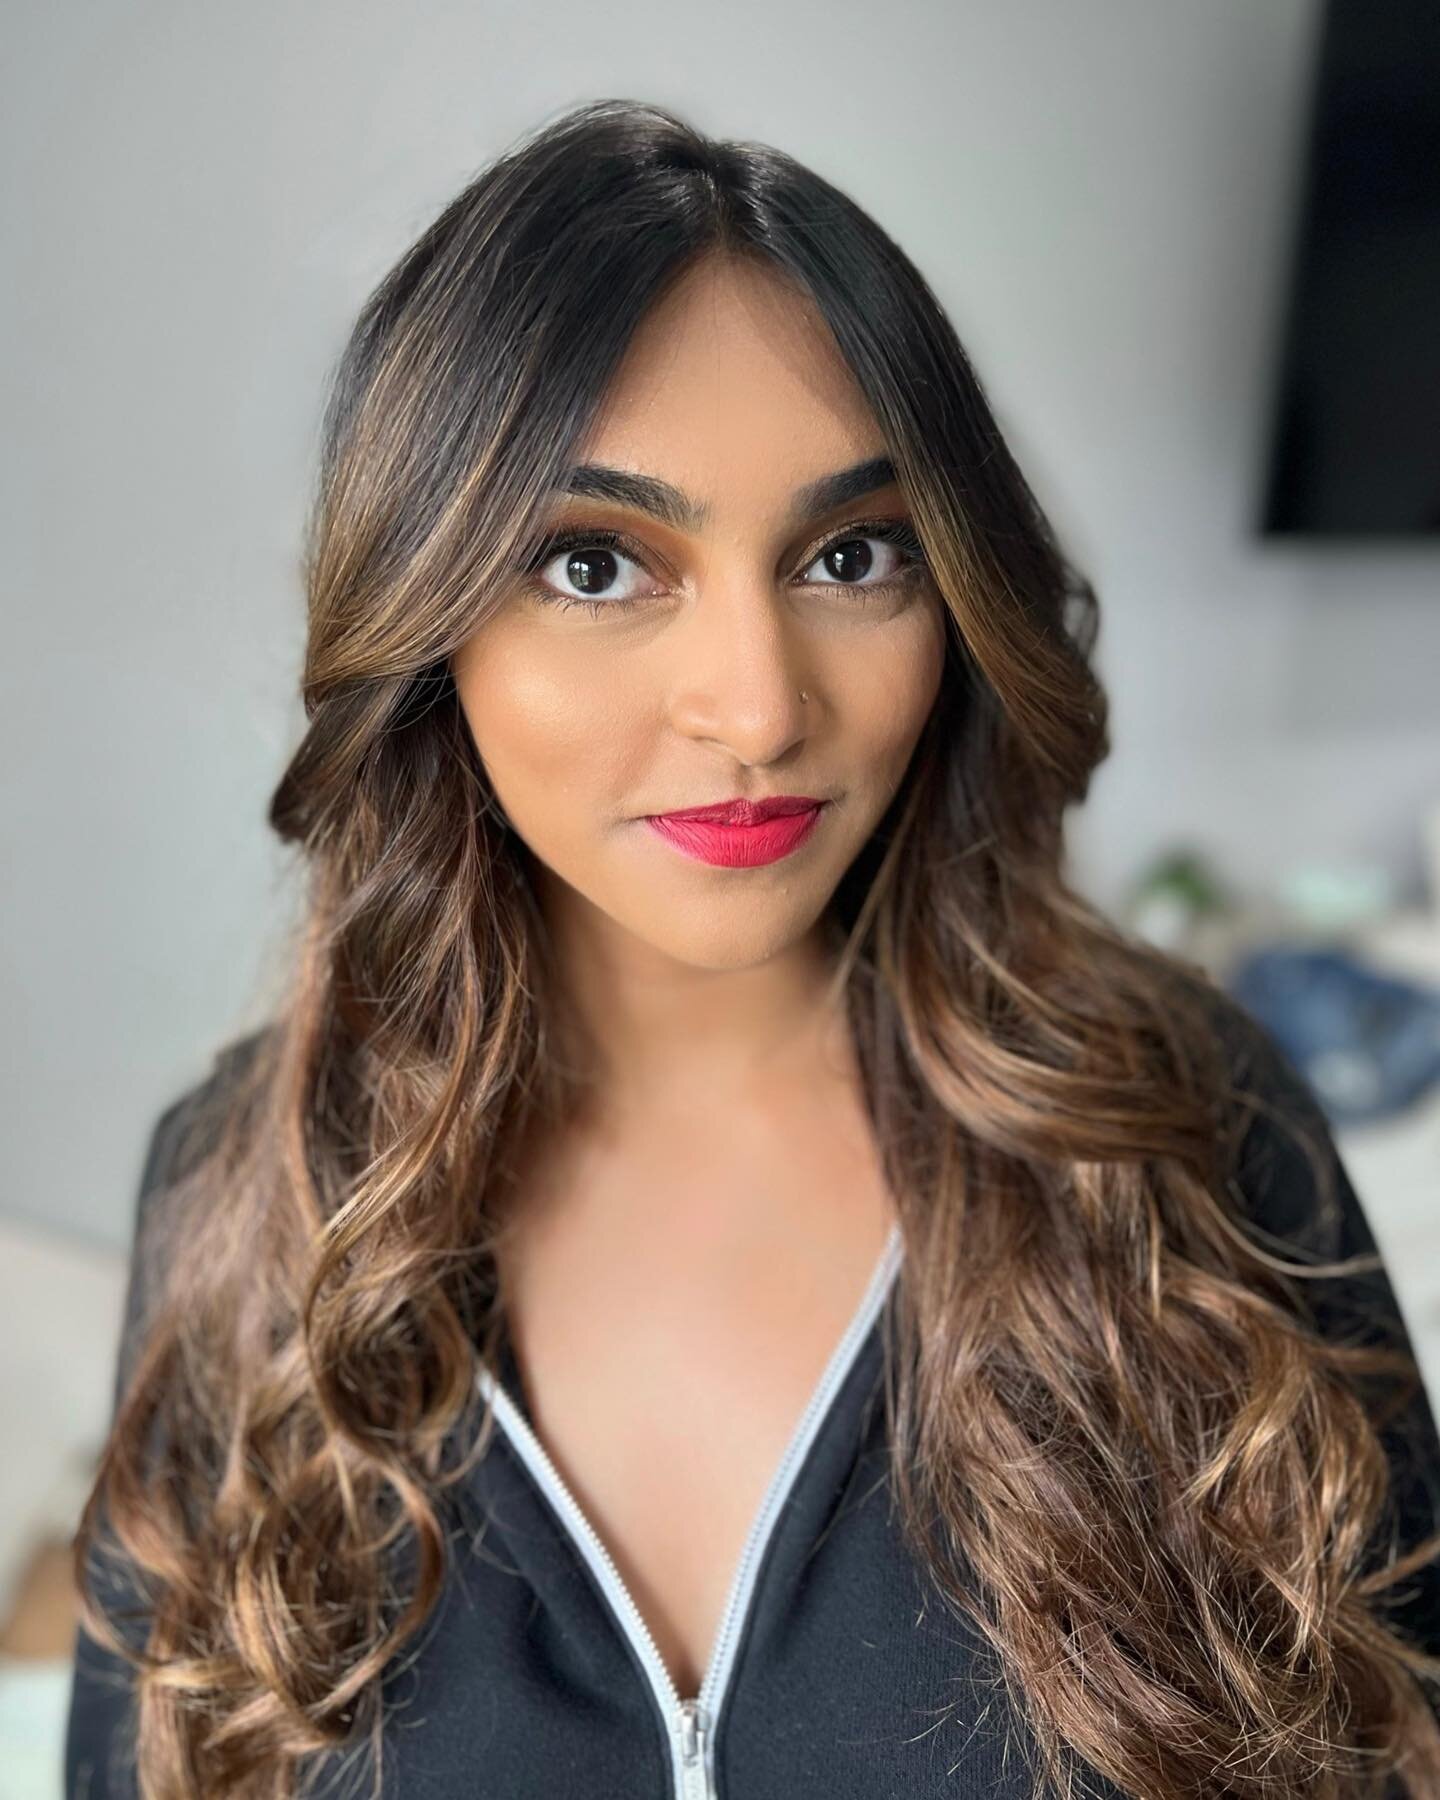 Mansi party glam. A red lip is classic 💋

While the @glamorousbyjuanita team specializes in bridal styling we customize looks for all occassions. Sweet 16s, prom, baby showers etc. We specialize in making women feel beautiful for life&rsquo;s bigges